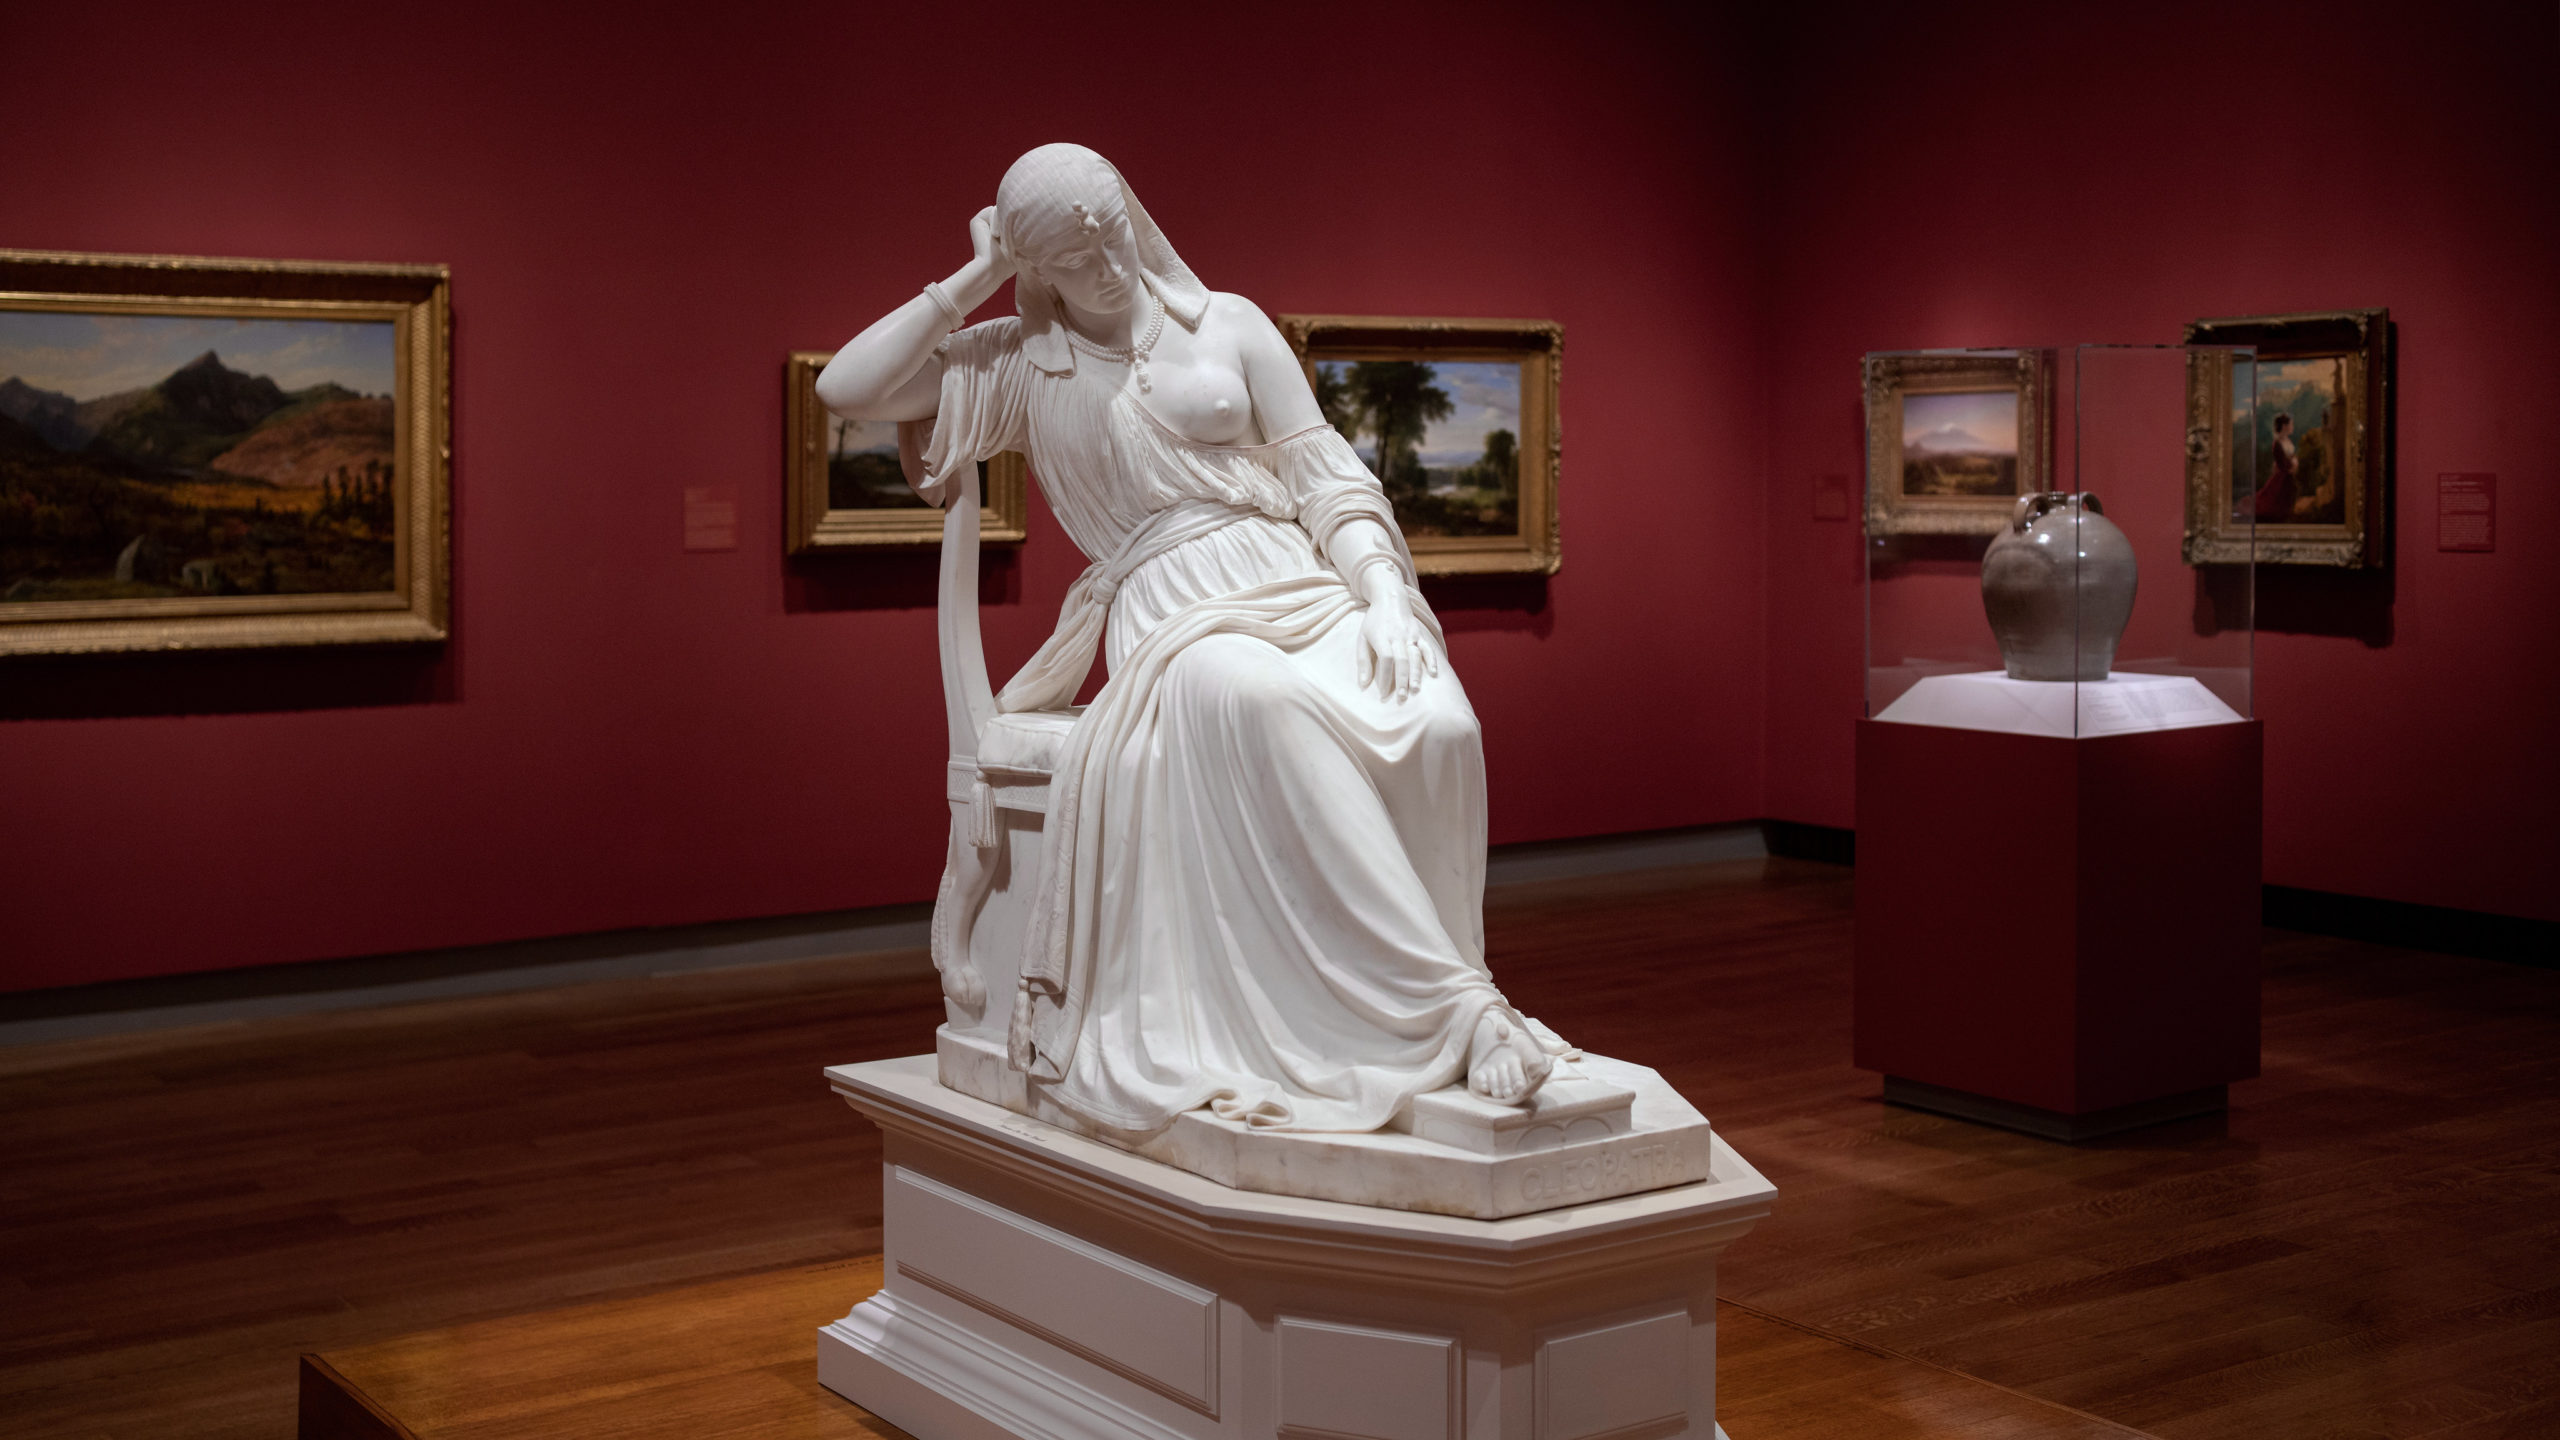 William Wetmore Story, Cleopatra, marble, modeled 1858, carved 1865, 137.16 x114.3 x 68.58 cm (Virginia Museum of Fine Arts)